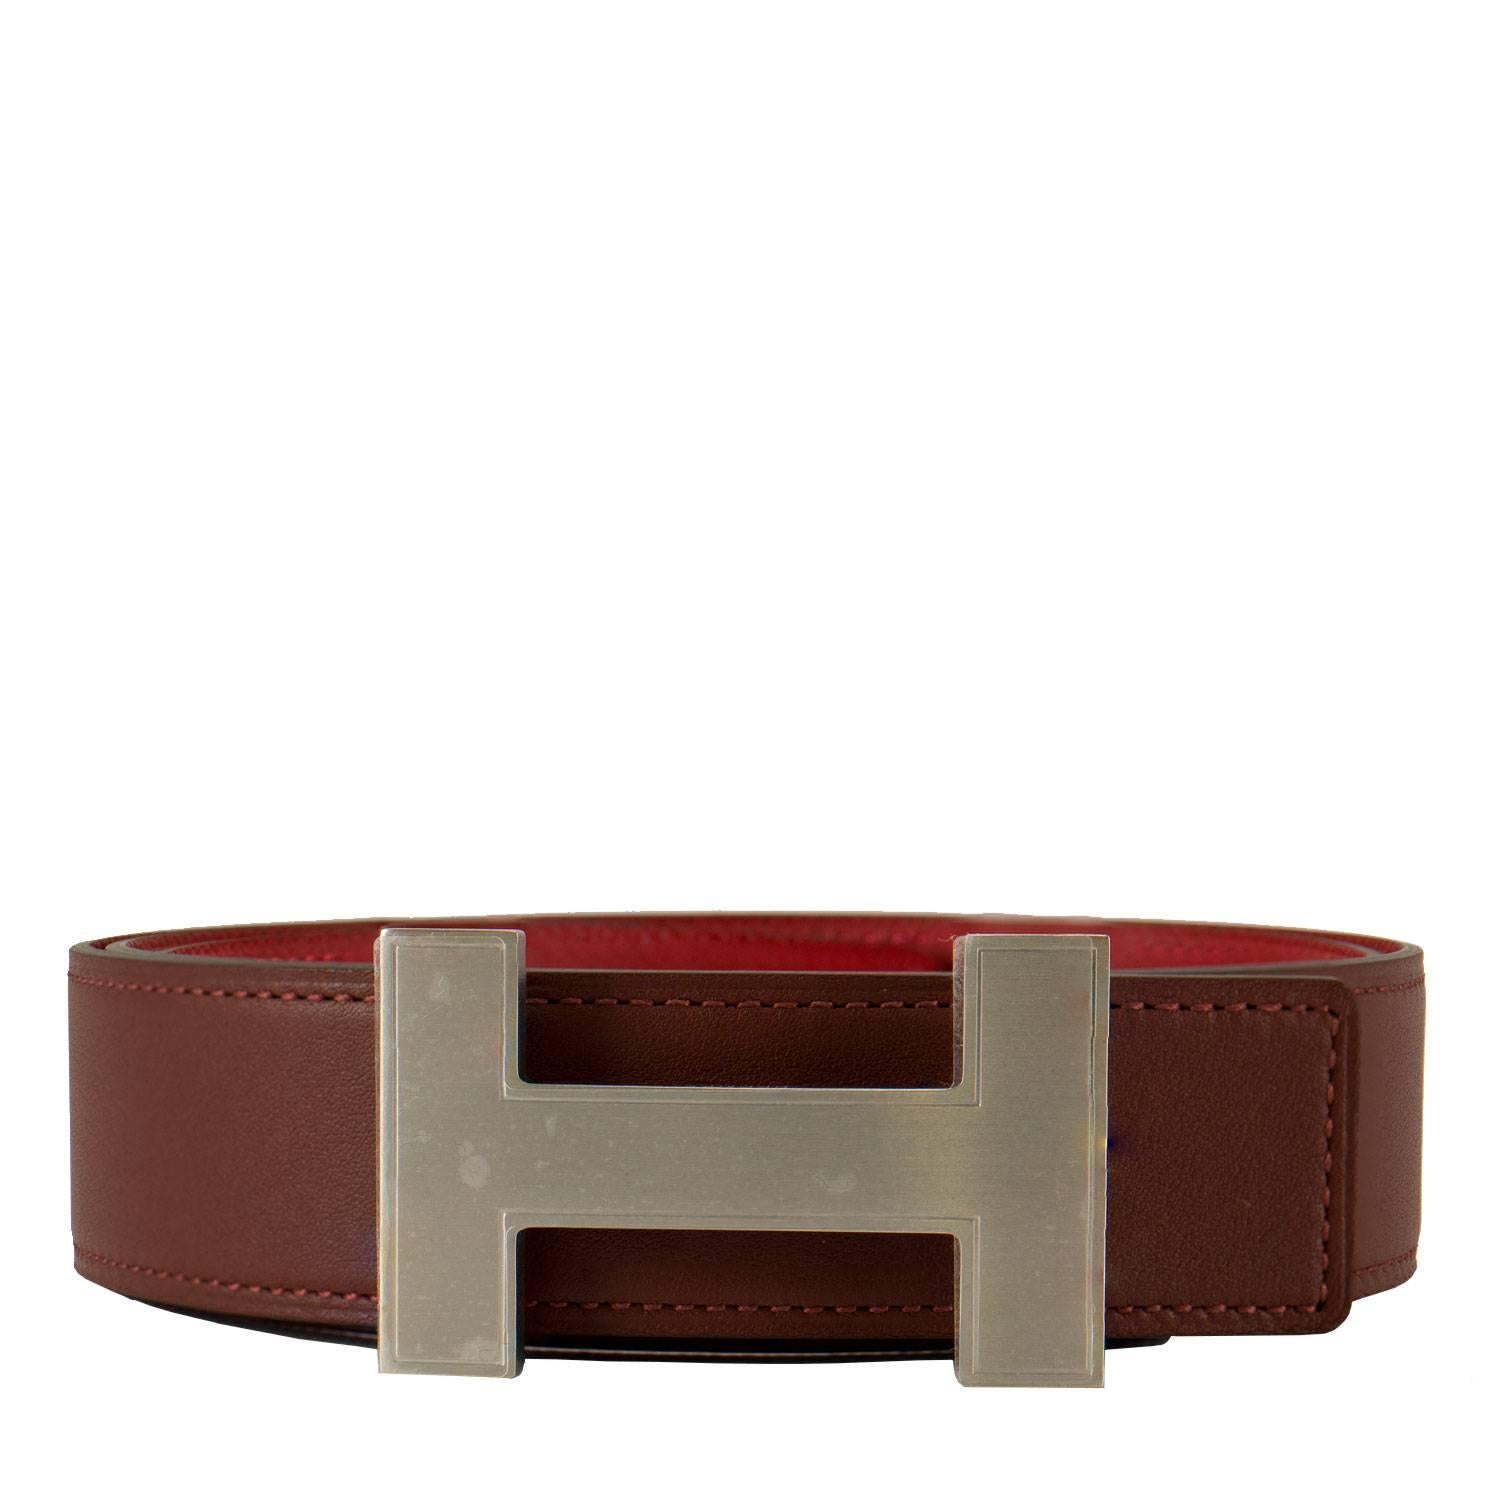 Hermes reversible Belt H Swift/Epsom Rouge H/Rouge Casaque Palladium Hardware

Pre-owned and never used

Bought it in hermes store in 2016.

Color:  Rouge H/Rouge Casaque.

Model: H.

Size: 90cm.

Details:
*Protective felt removed for